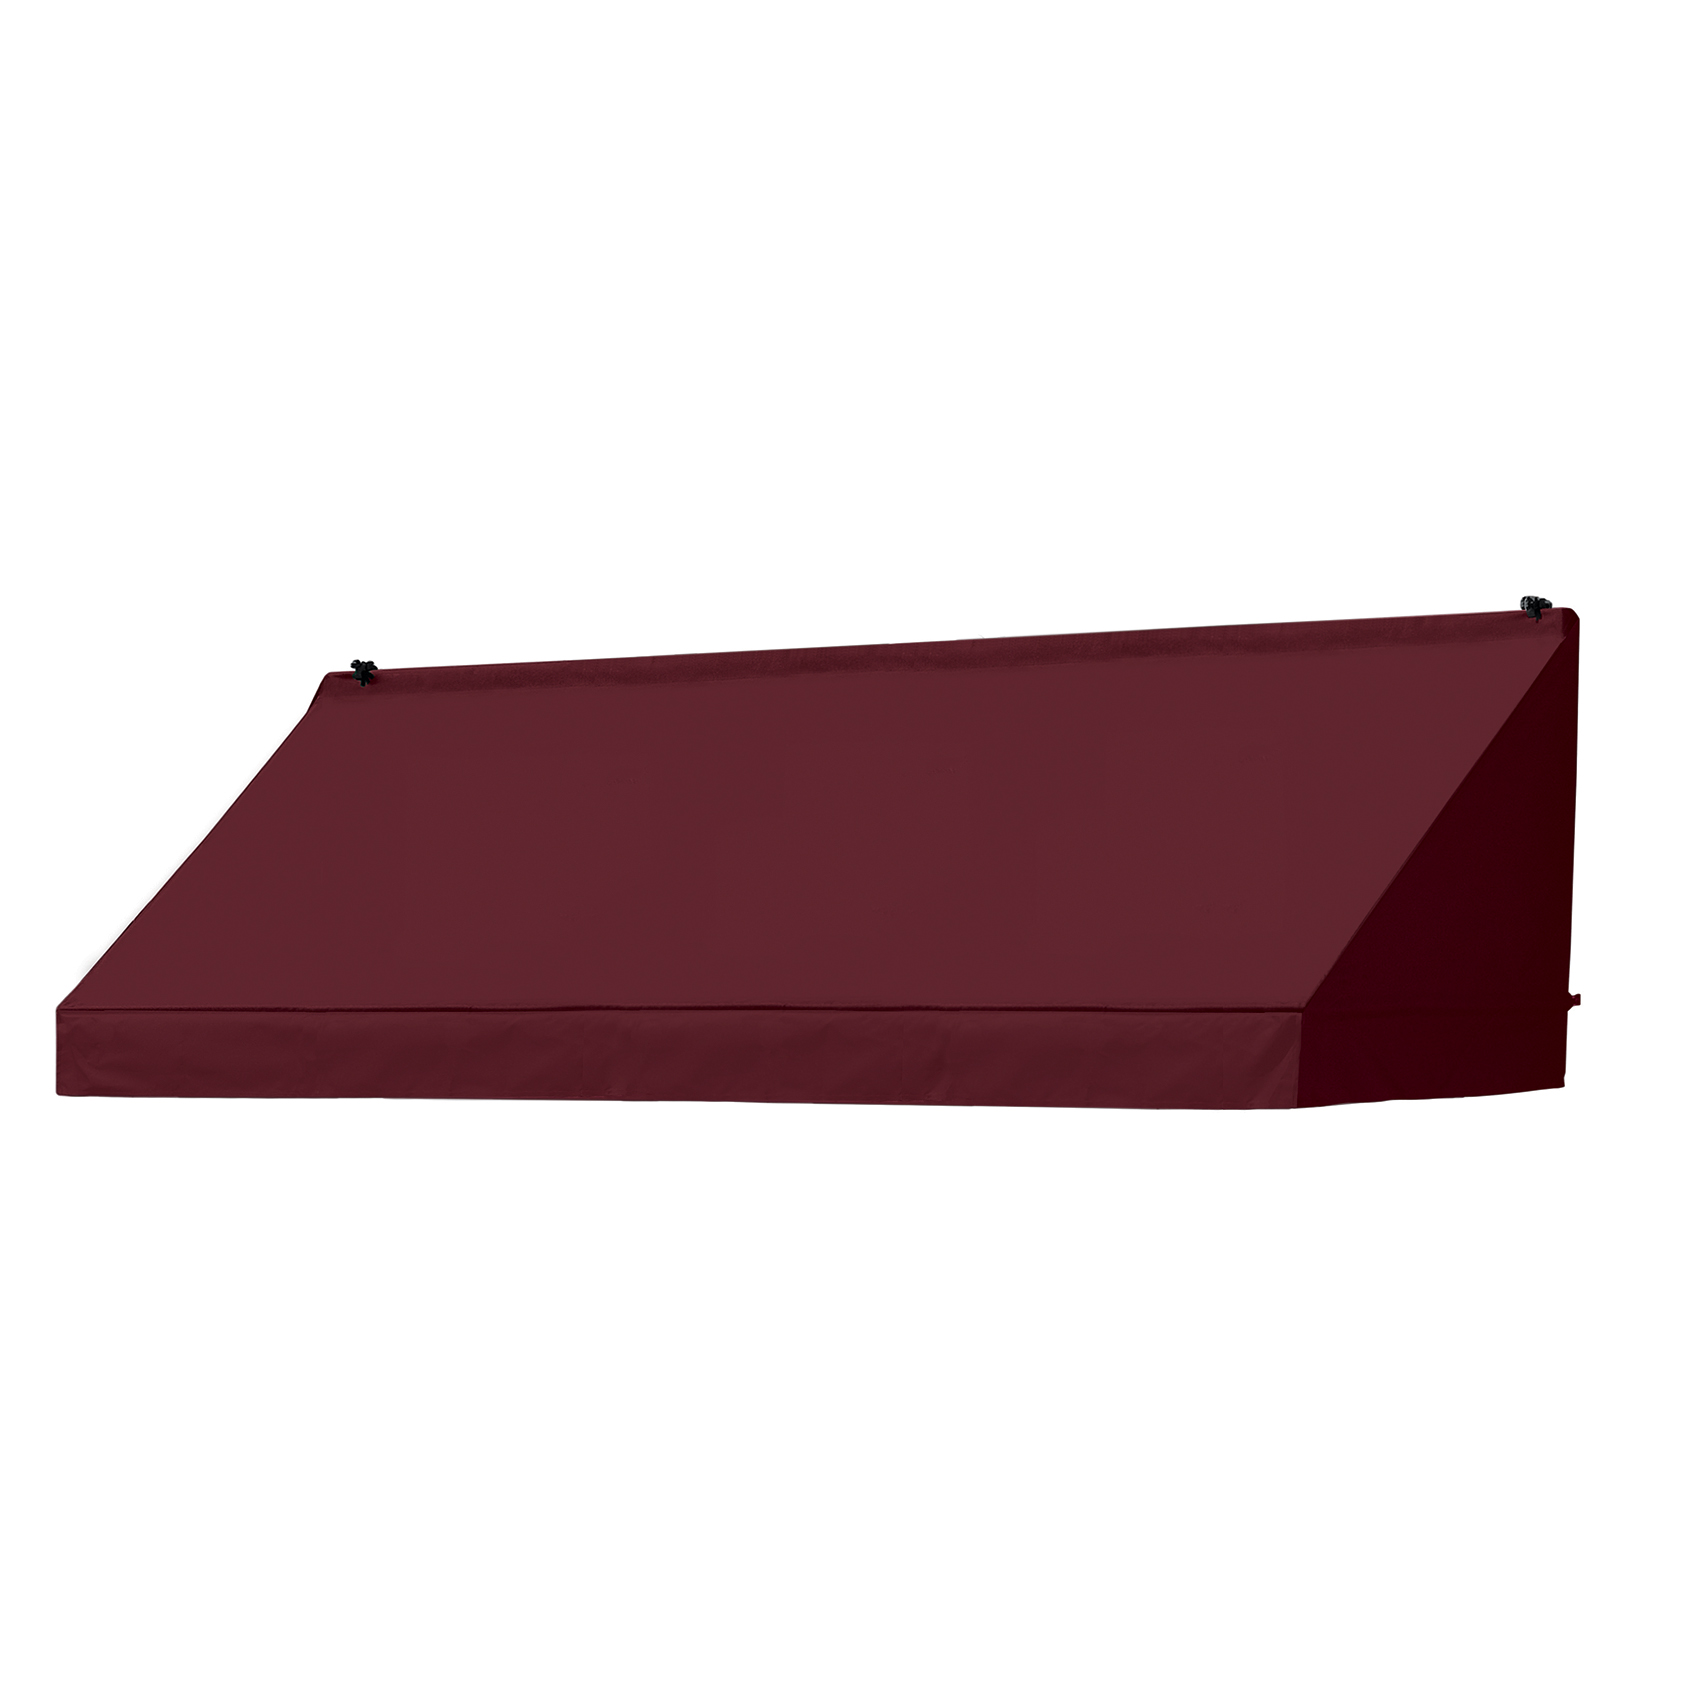 Awnings in a Box&reg; 8' Classic Style Awning in Assorted Colors